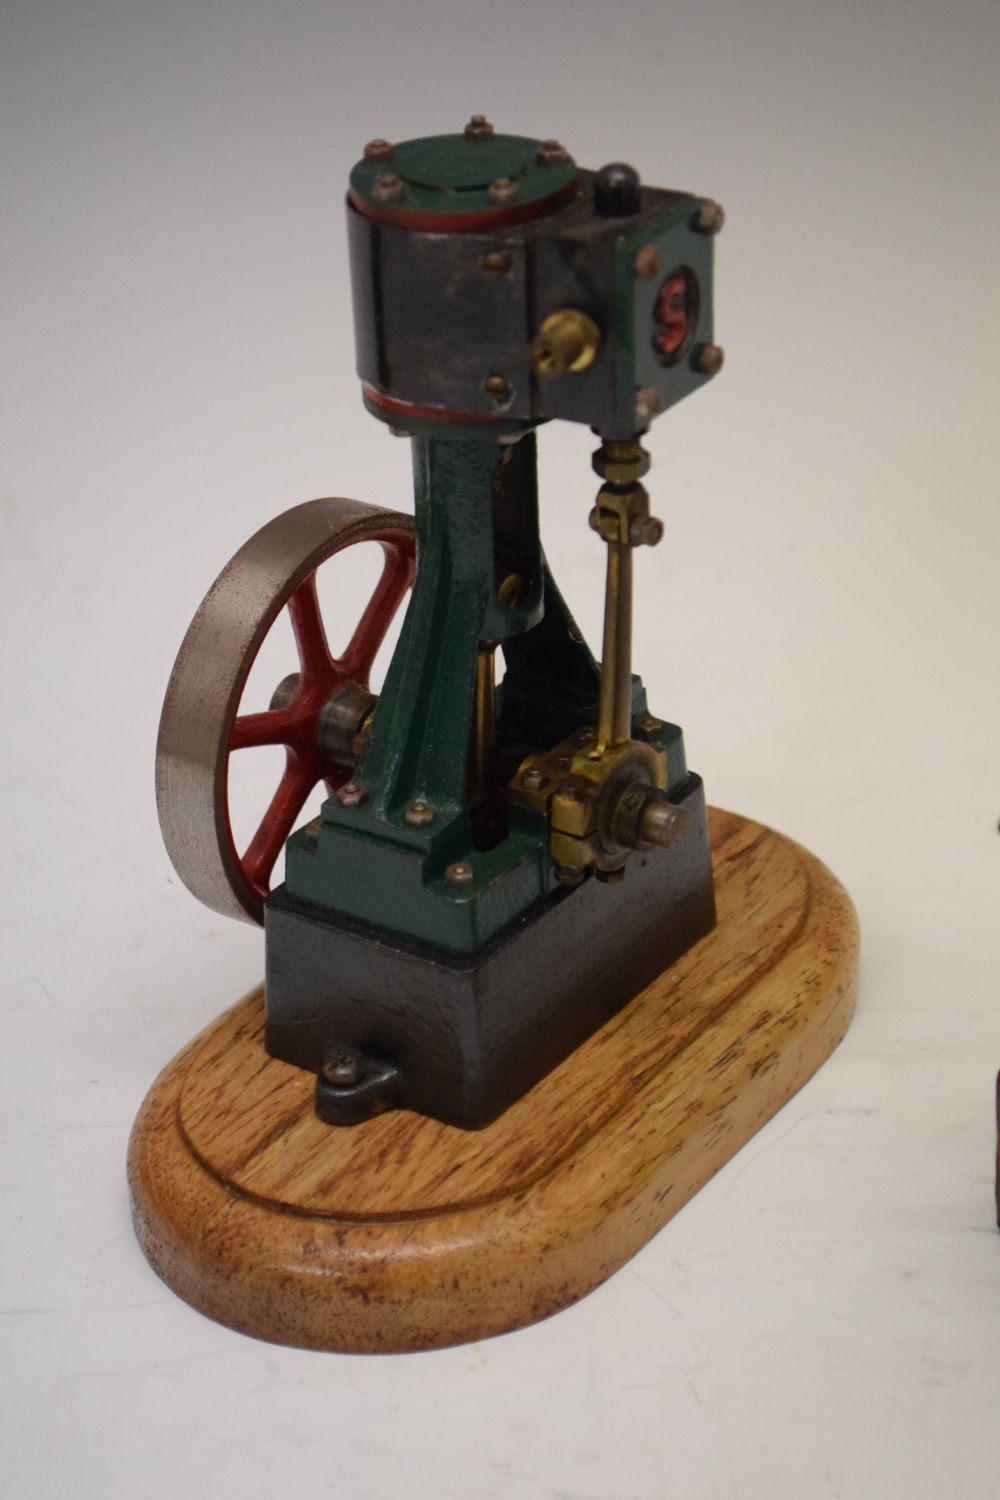 Stuart Turner model No.10 stationary steam engine, with 3-inch single fly wheel, 15cm high, on - Image 6 of 11